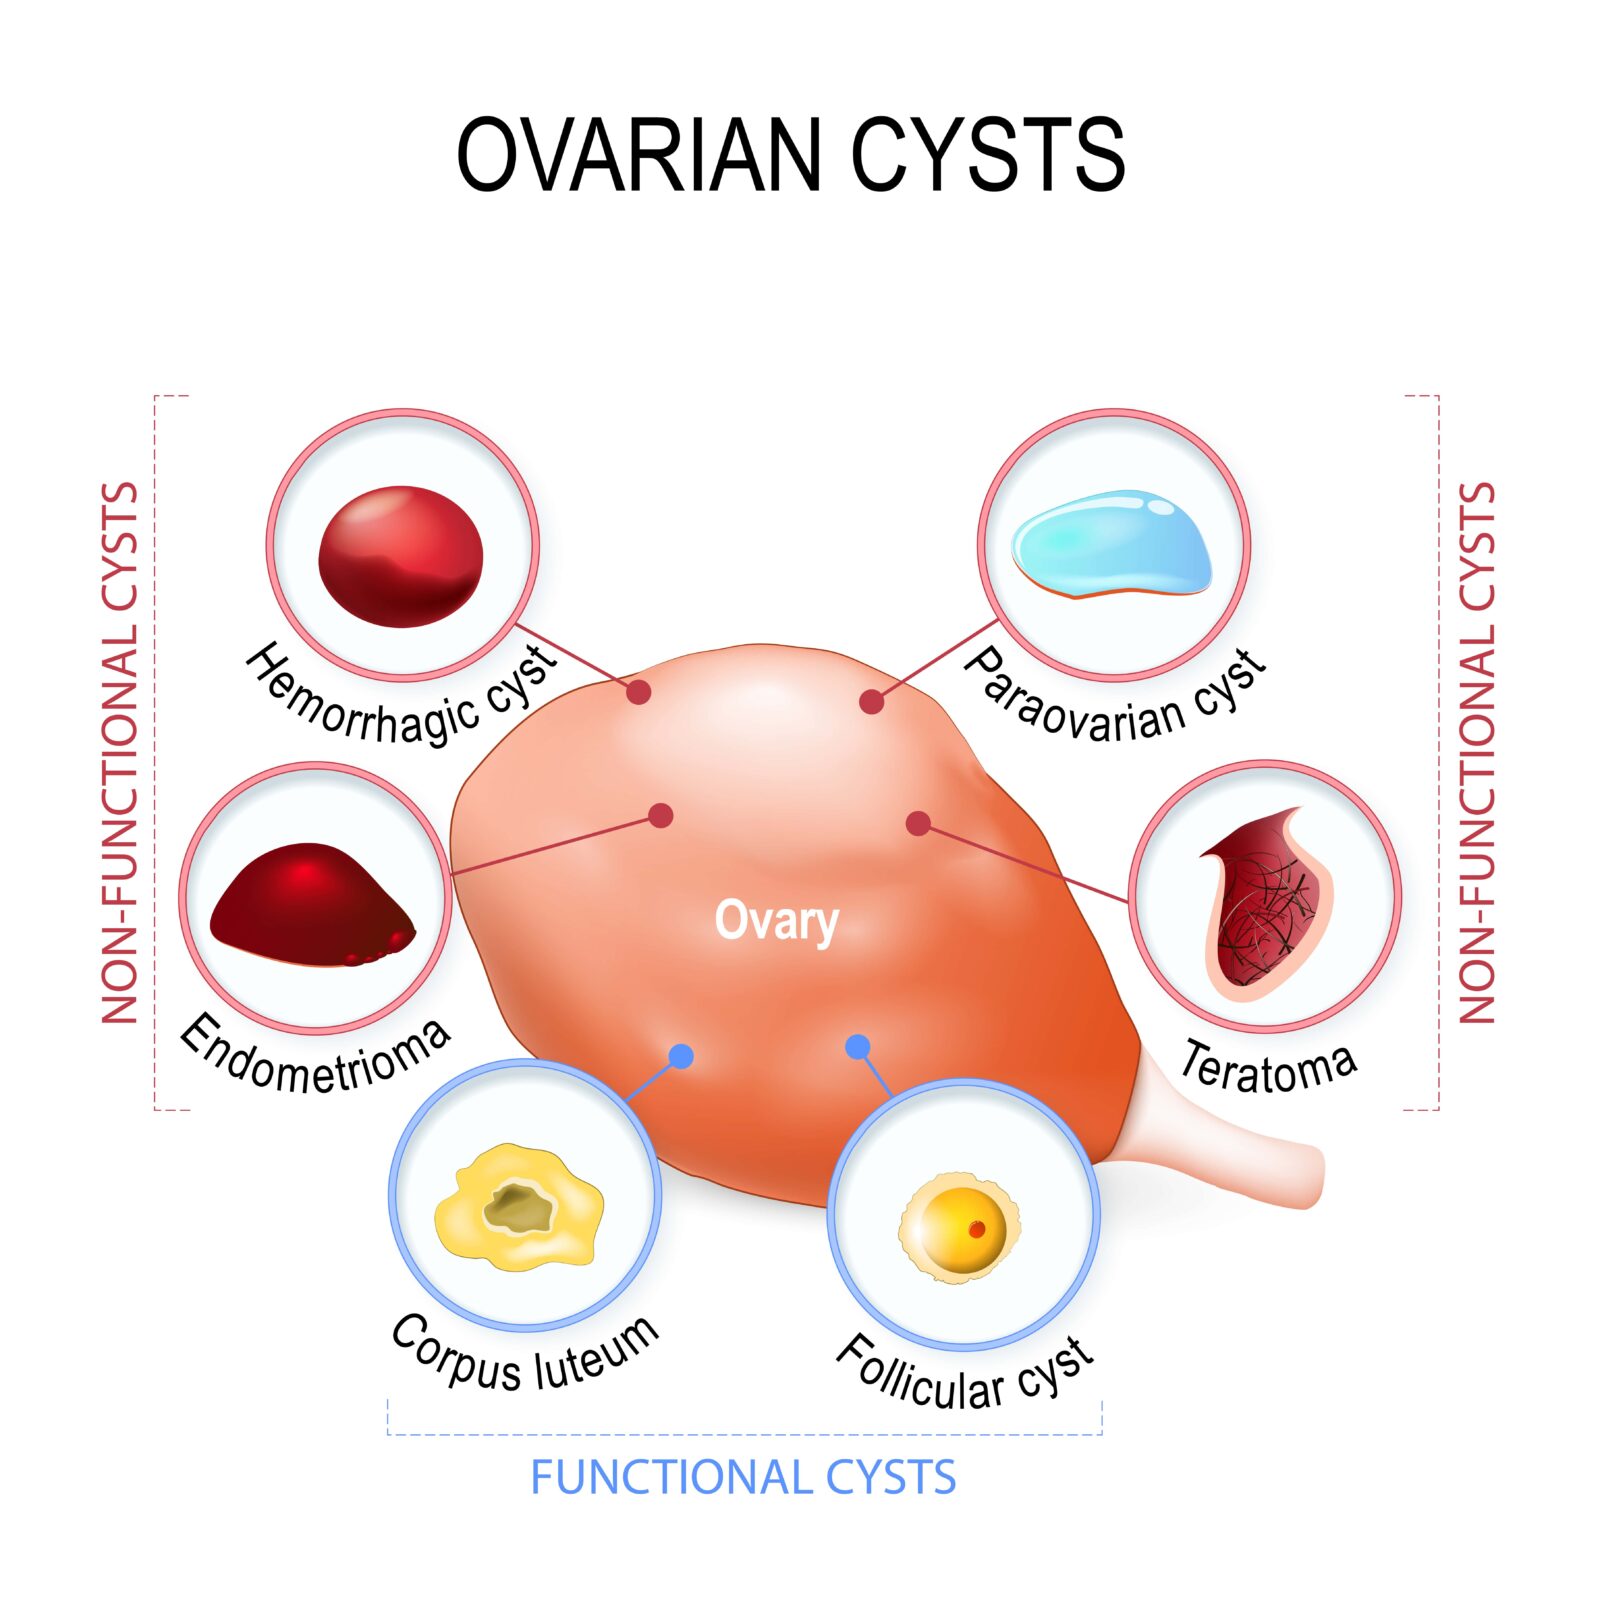 ovarian cysts and their types